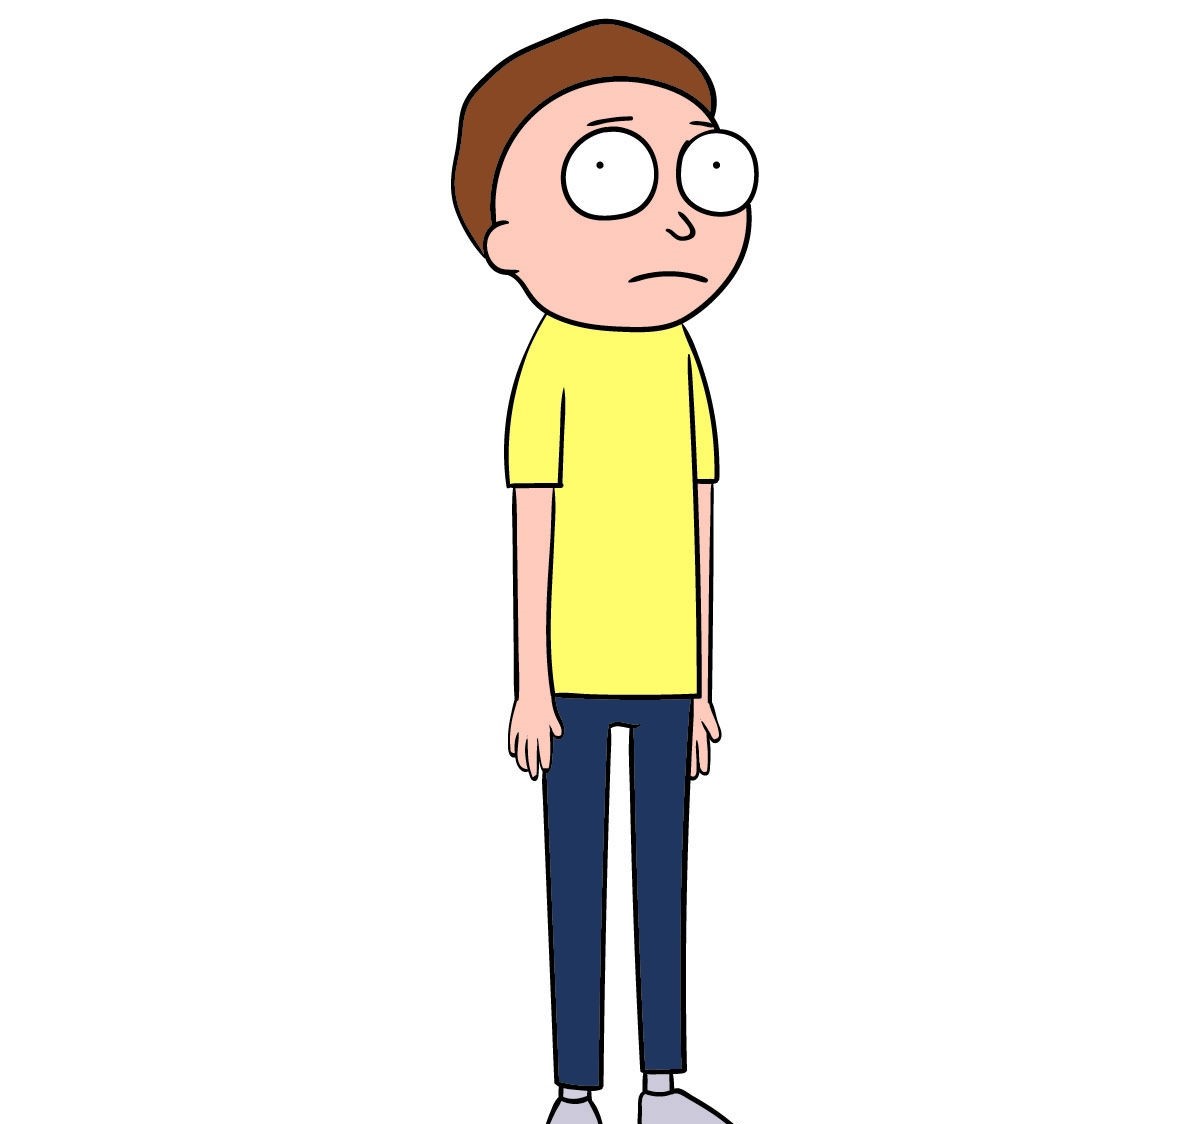 12-facts-about-morty-smith-rick-and-morty